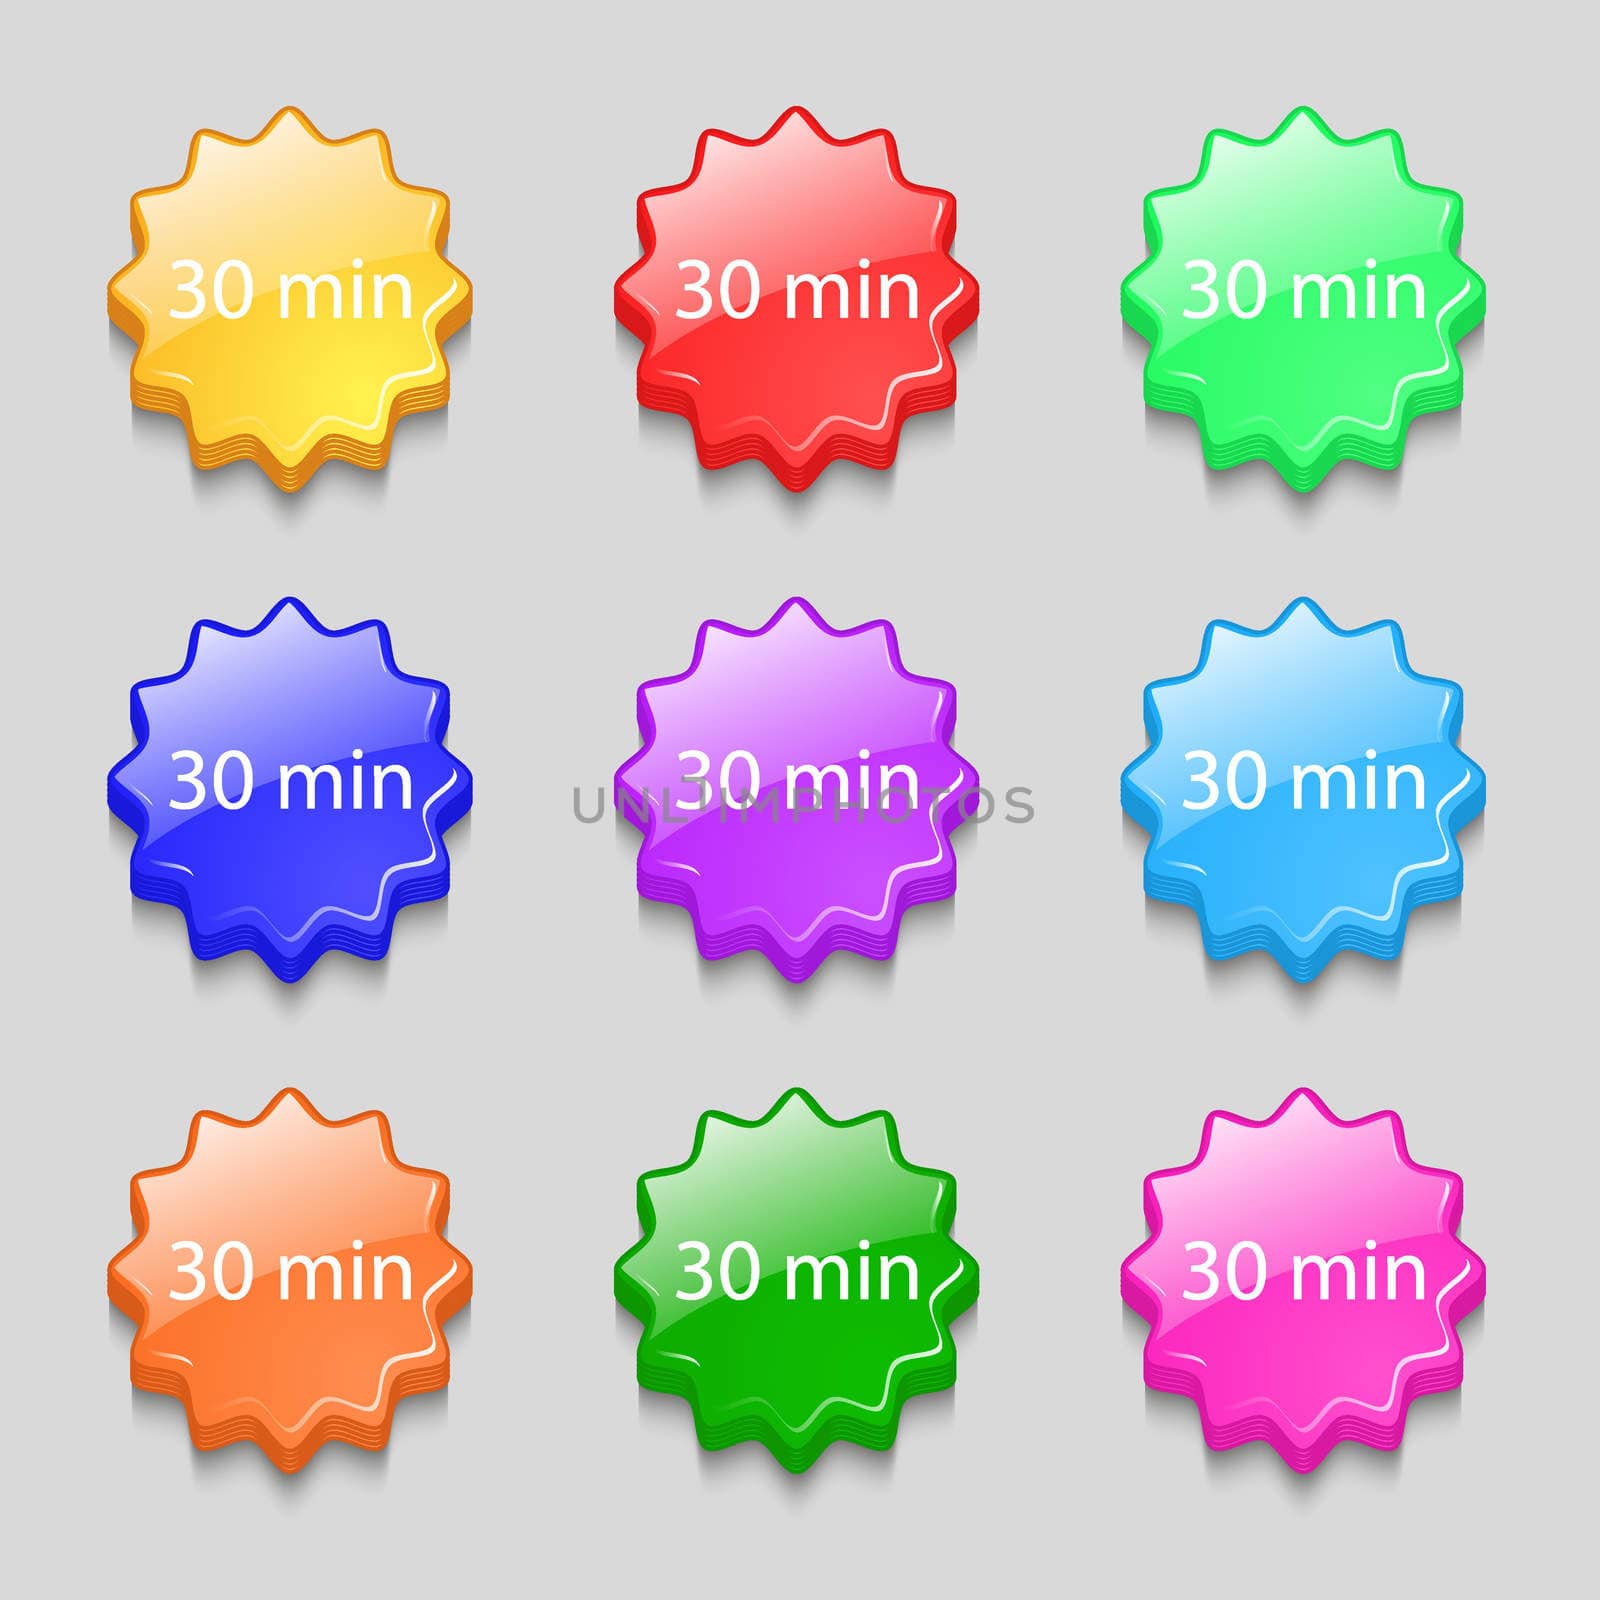 30 minutes sign icon. Symbols on nine wavy colourful buttons. illustration